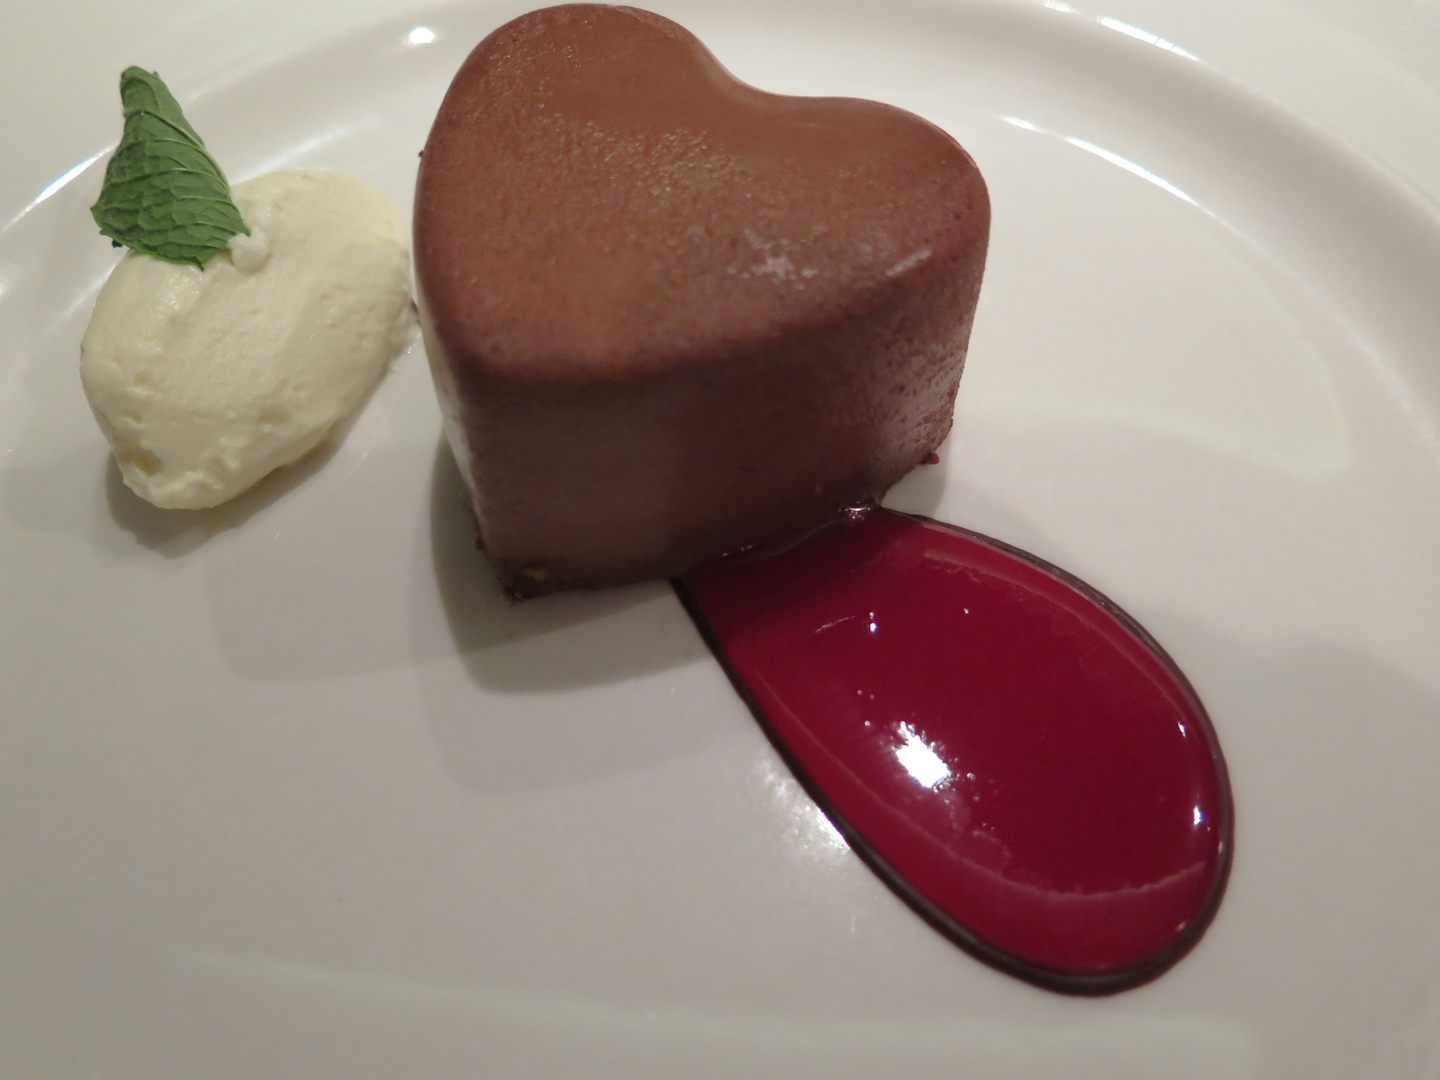 My husband could not resist the Princess Dream Chocolate dessert 7 times on our 10 day cruise